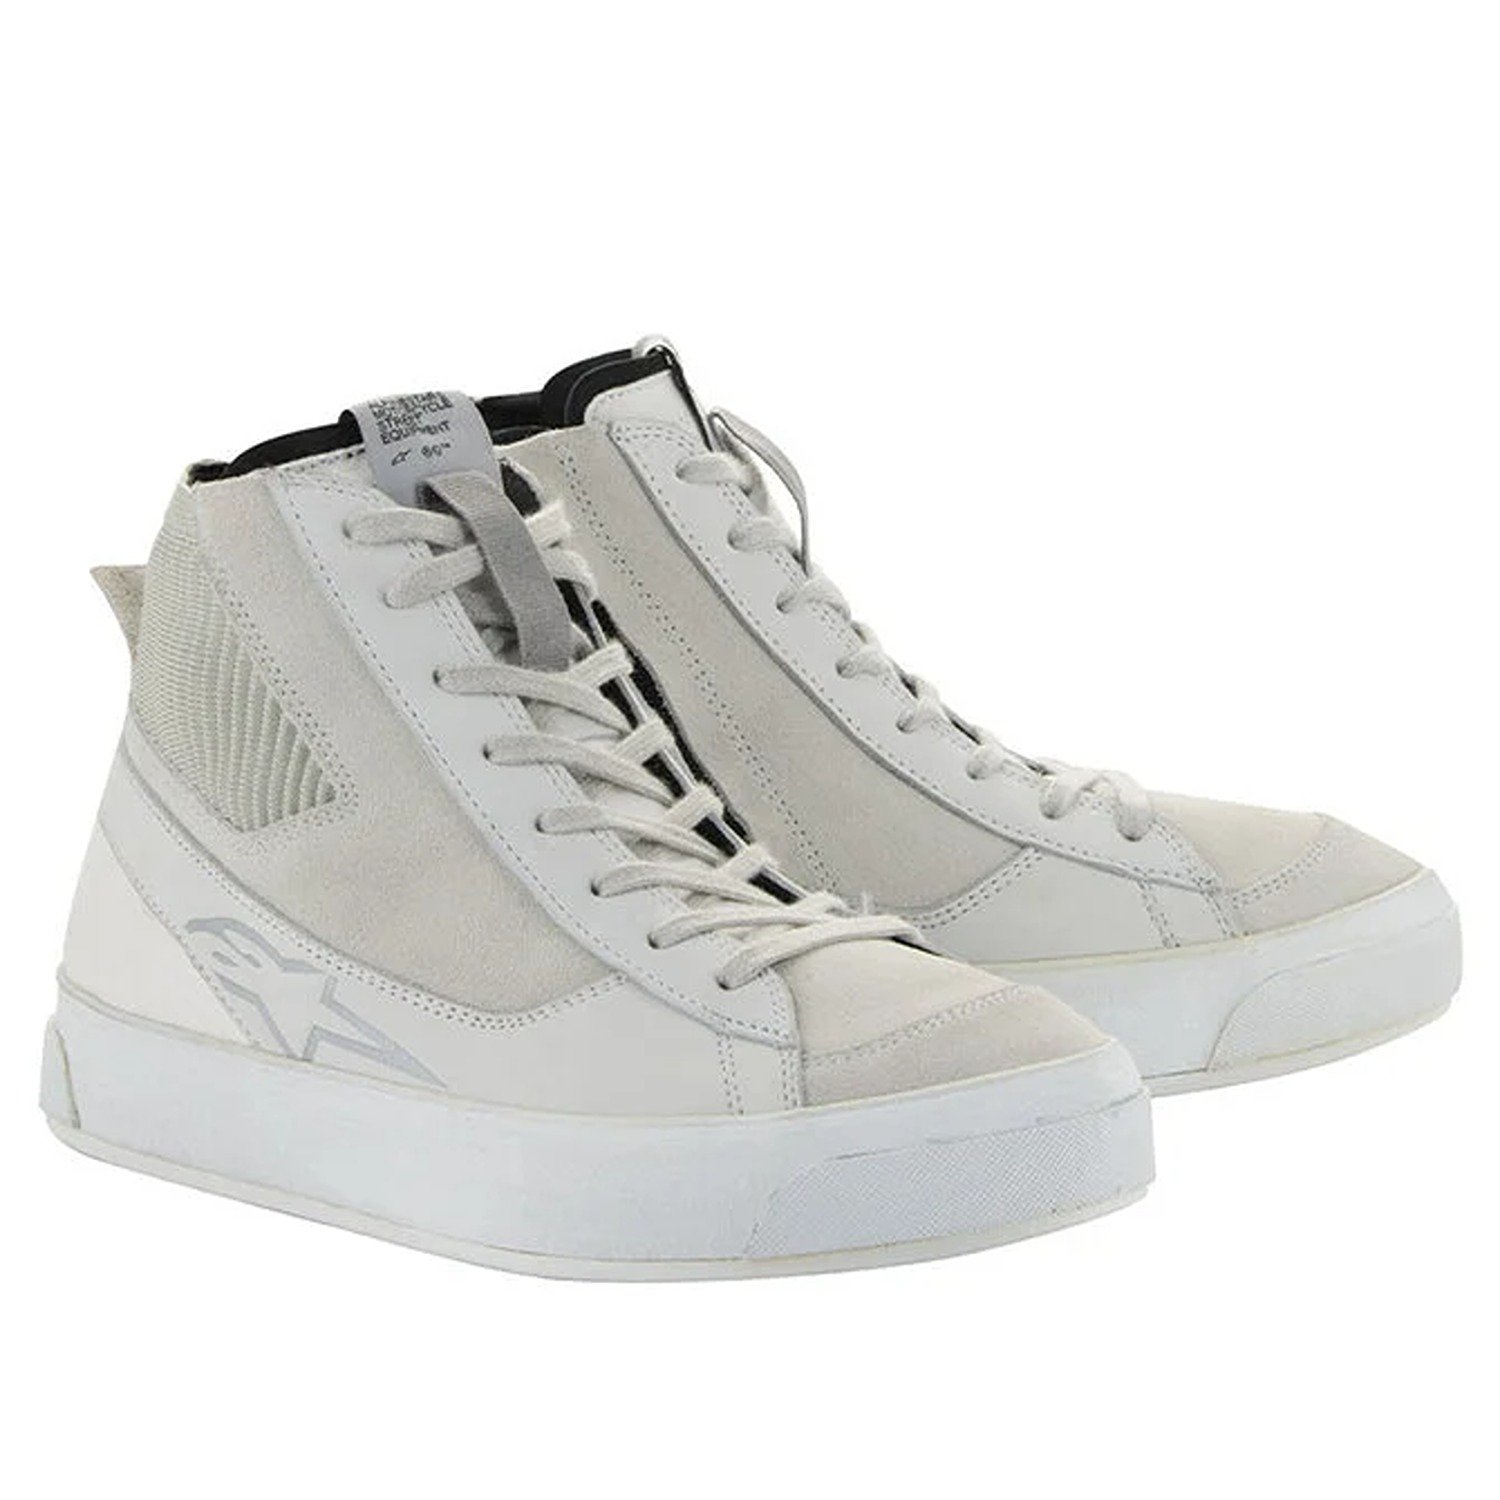 Image of EU Alpinestars Stated Shoes White Cool Gray Taille US 95